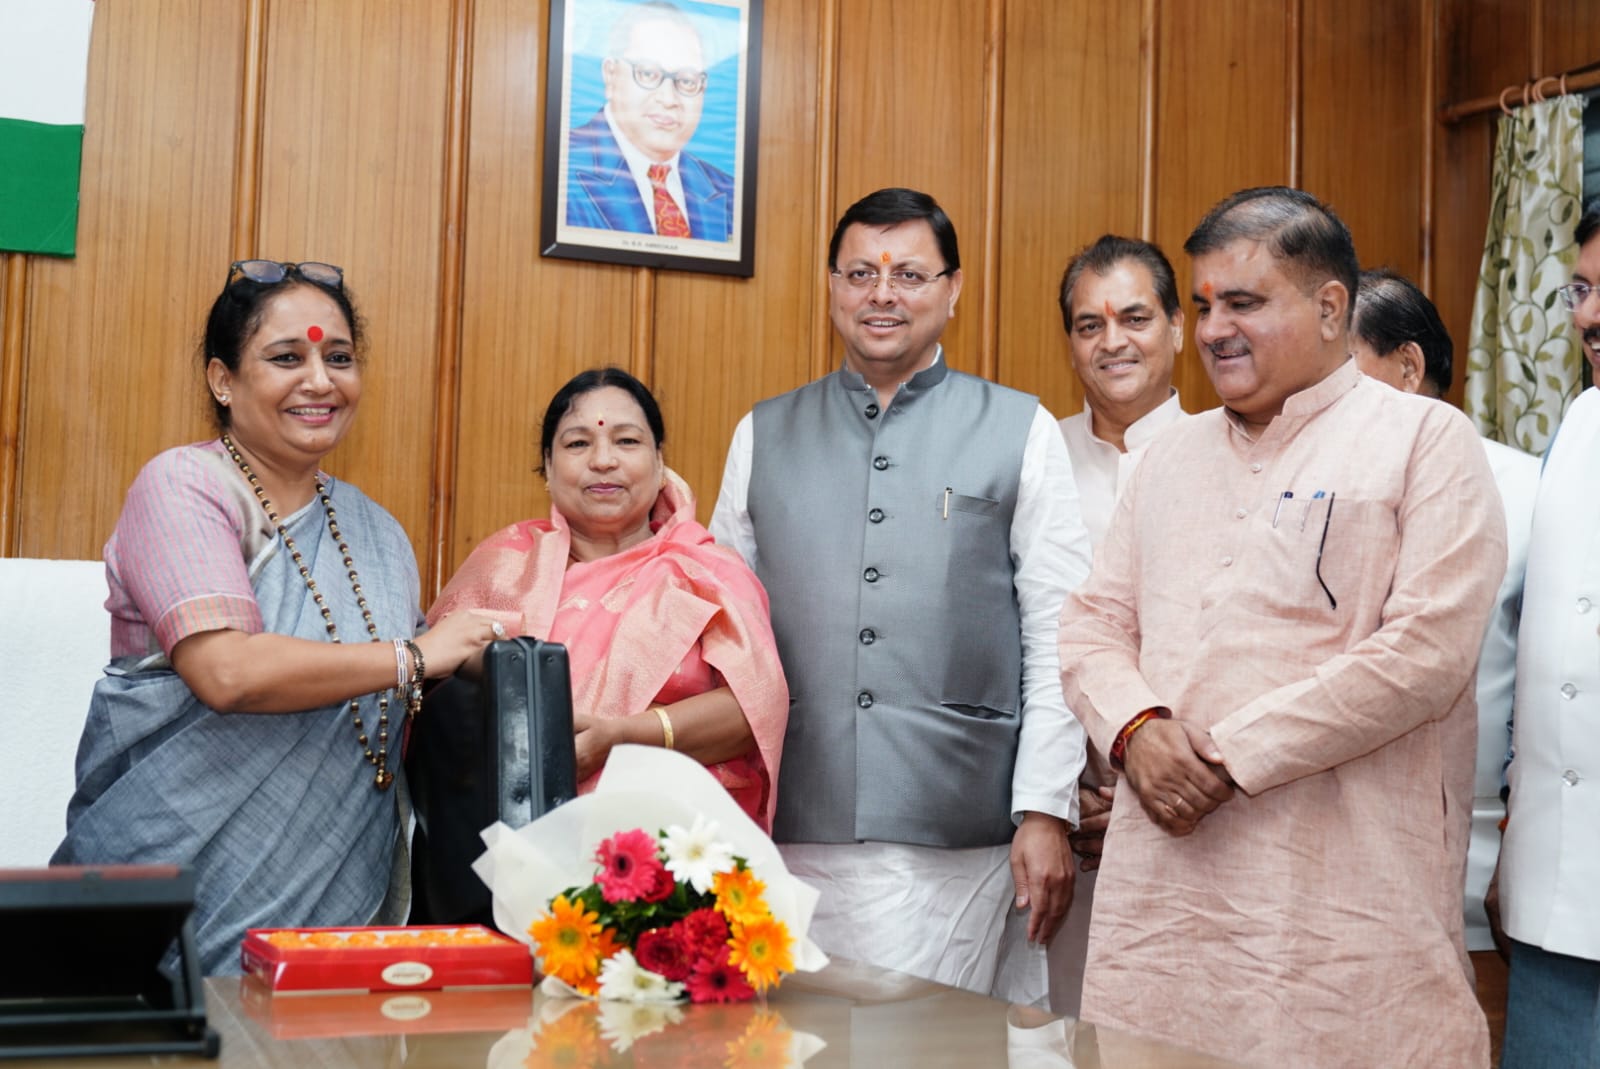 CM Dhami participated in the swearing-in ceremony of newly elected MLA Parvati Das.